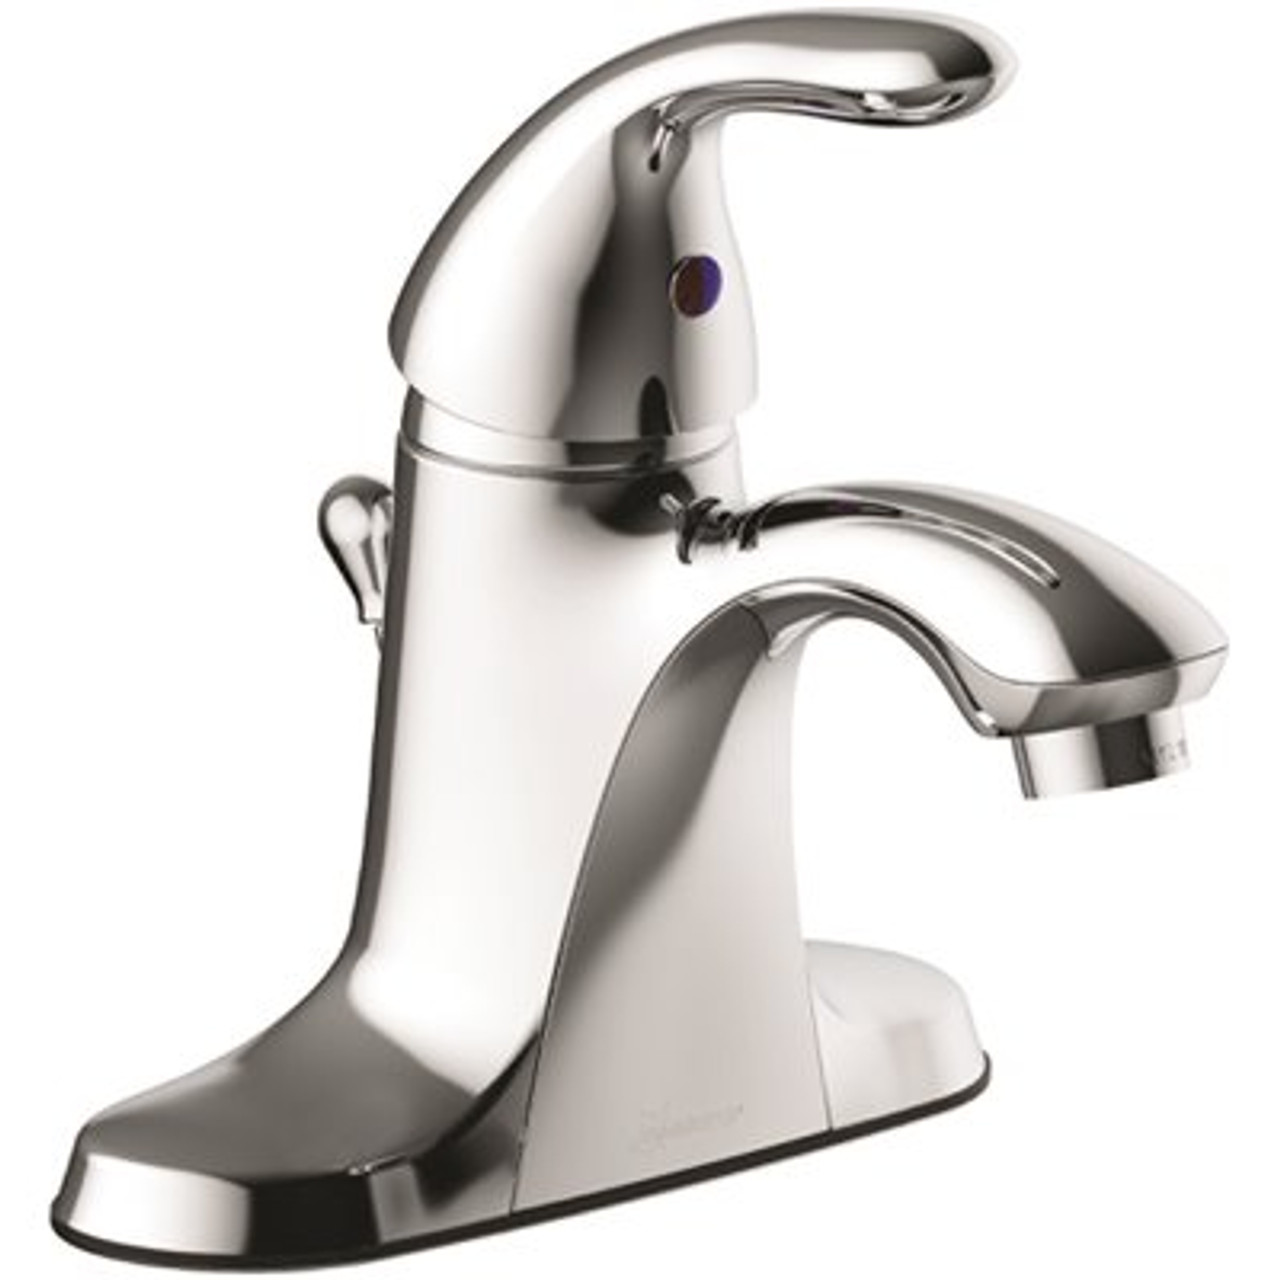 Anchor Point 4 in. Centerset Single-Handle Bathroom Faucet in Chrome with Quick Install Pop-Up